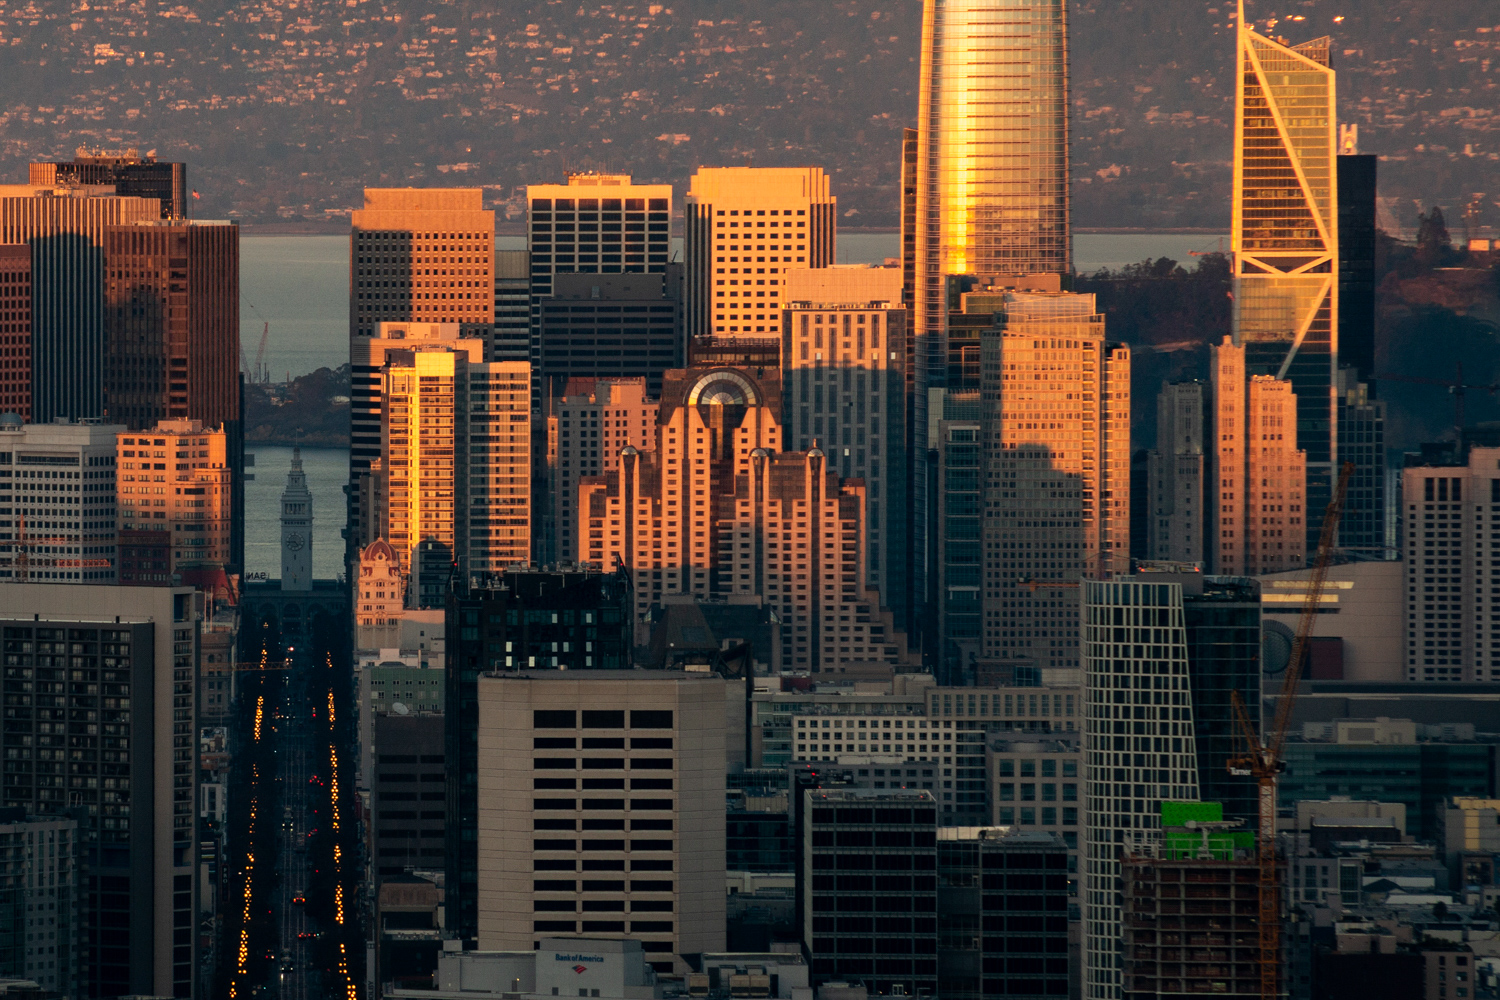 55 Fourth Street seen in the San Francisco skyline, image by Andrew Campbell Nelson